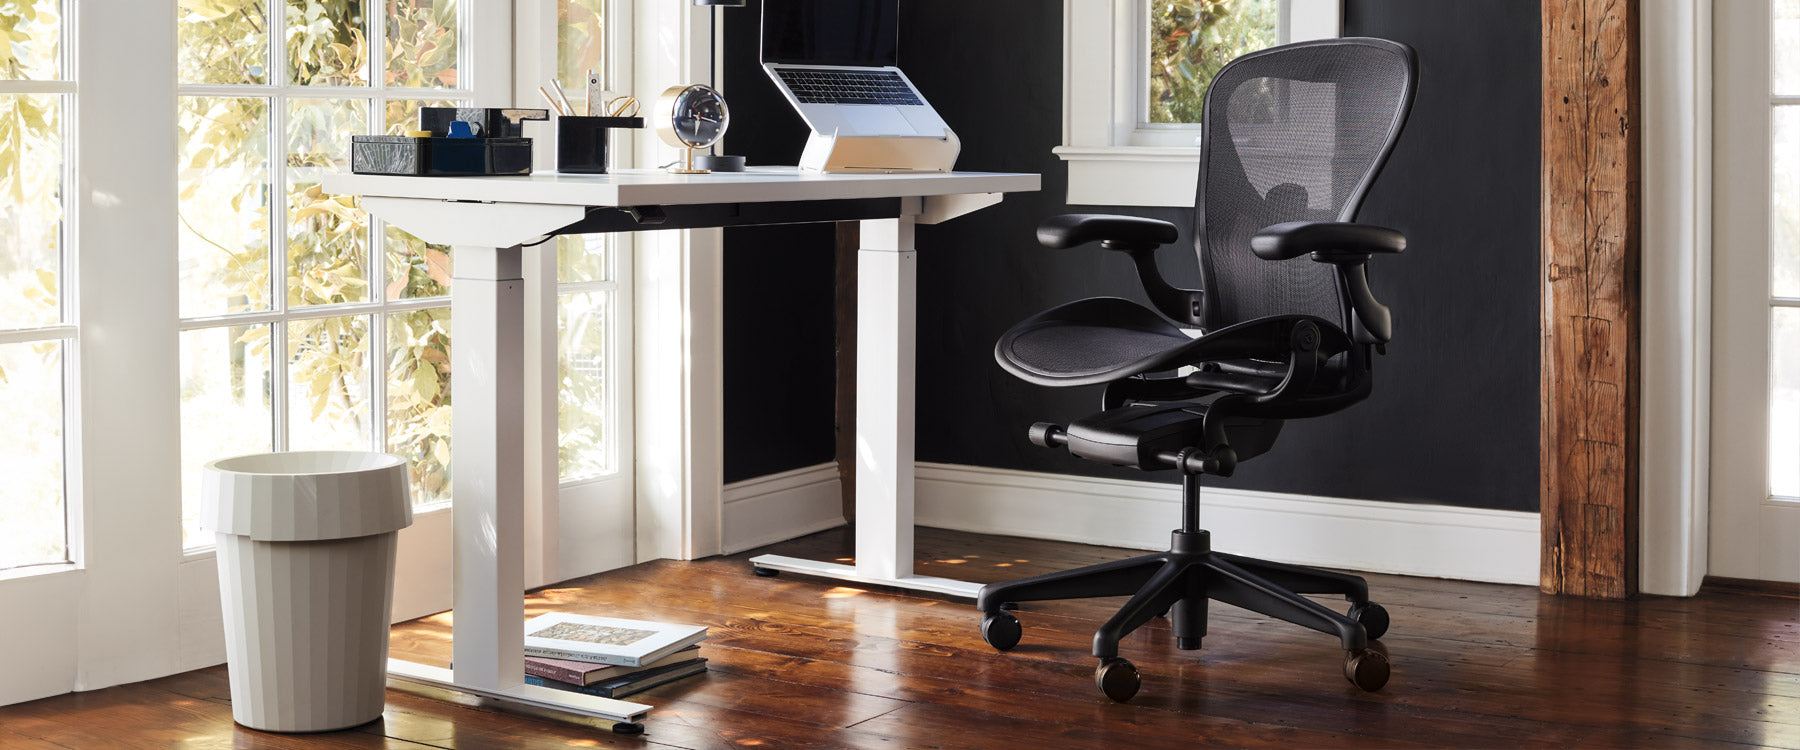 A home-office setup featuring a HAY Shade Bin, Herman Miller Nevi Standing Desk and Onyx black Aeron Chair